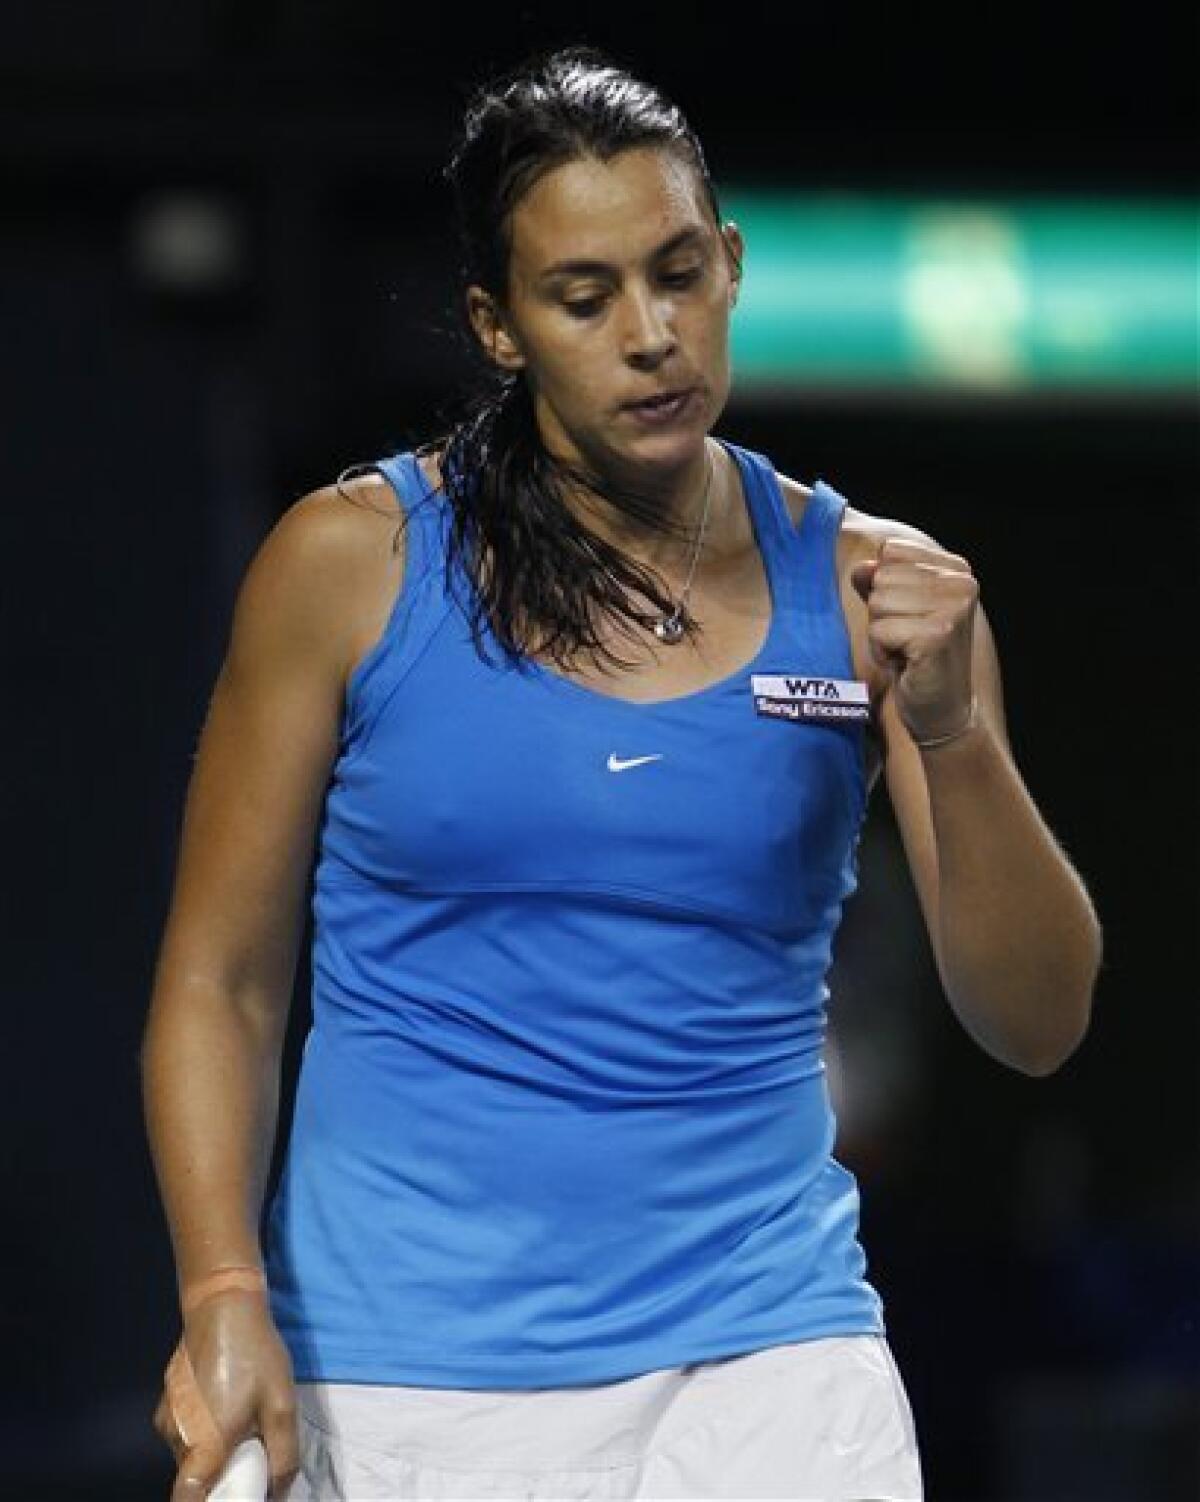 Marion Bartoli of France reacts after getting a point against Ayumi Morita of Japan during their second round match of during the Japan Pan Pacific Open tennis tournament in Tokyo, Monday, Sept. 26, 2011. Bartoli won 6-3, 0-6, 6-3. (AP Photo/Shizuo Kambayashi)